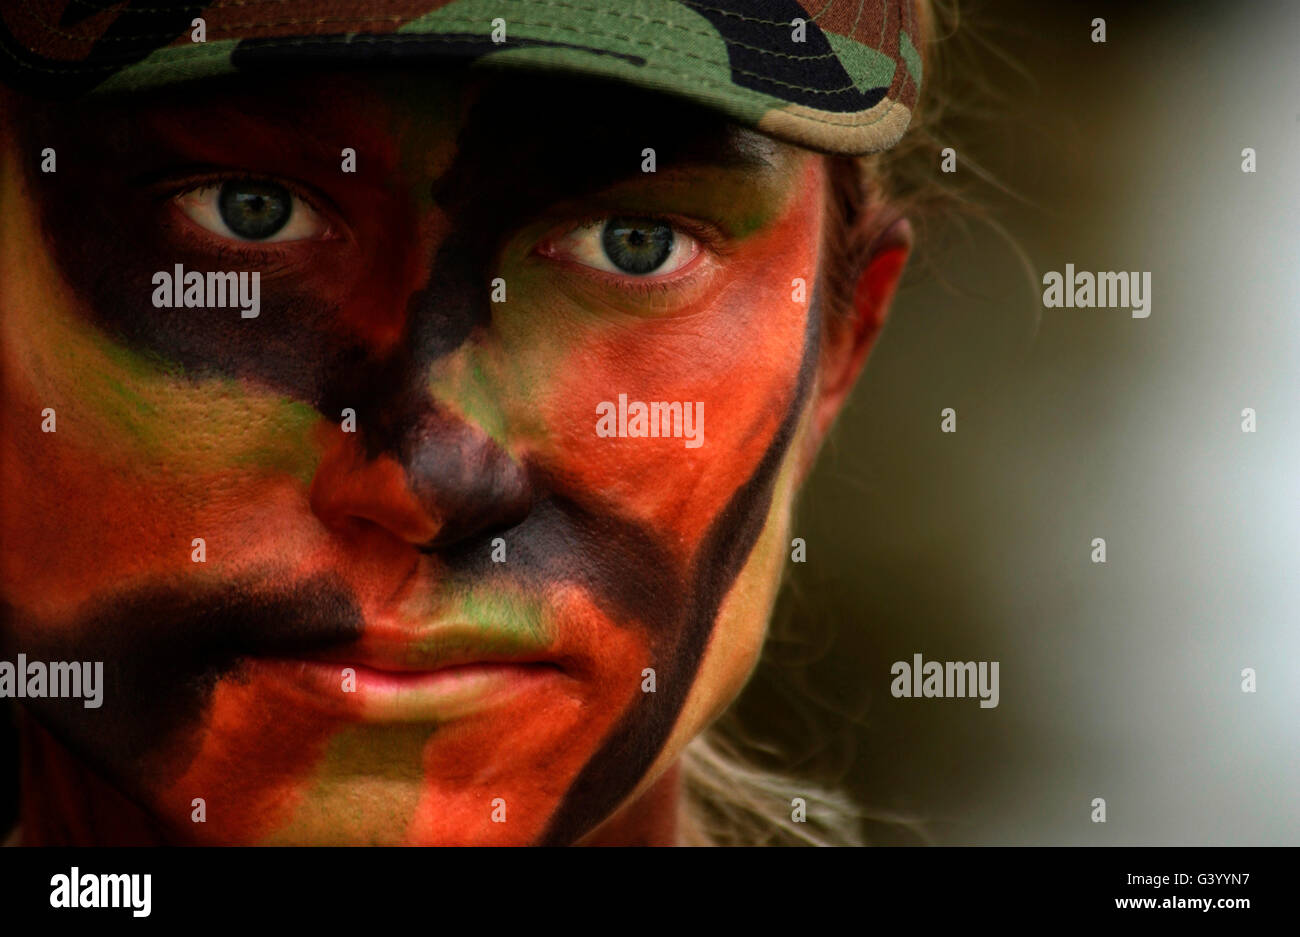 Close-up of U.S. Air Force soldier with camouflage face paint. Stock Photo